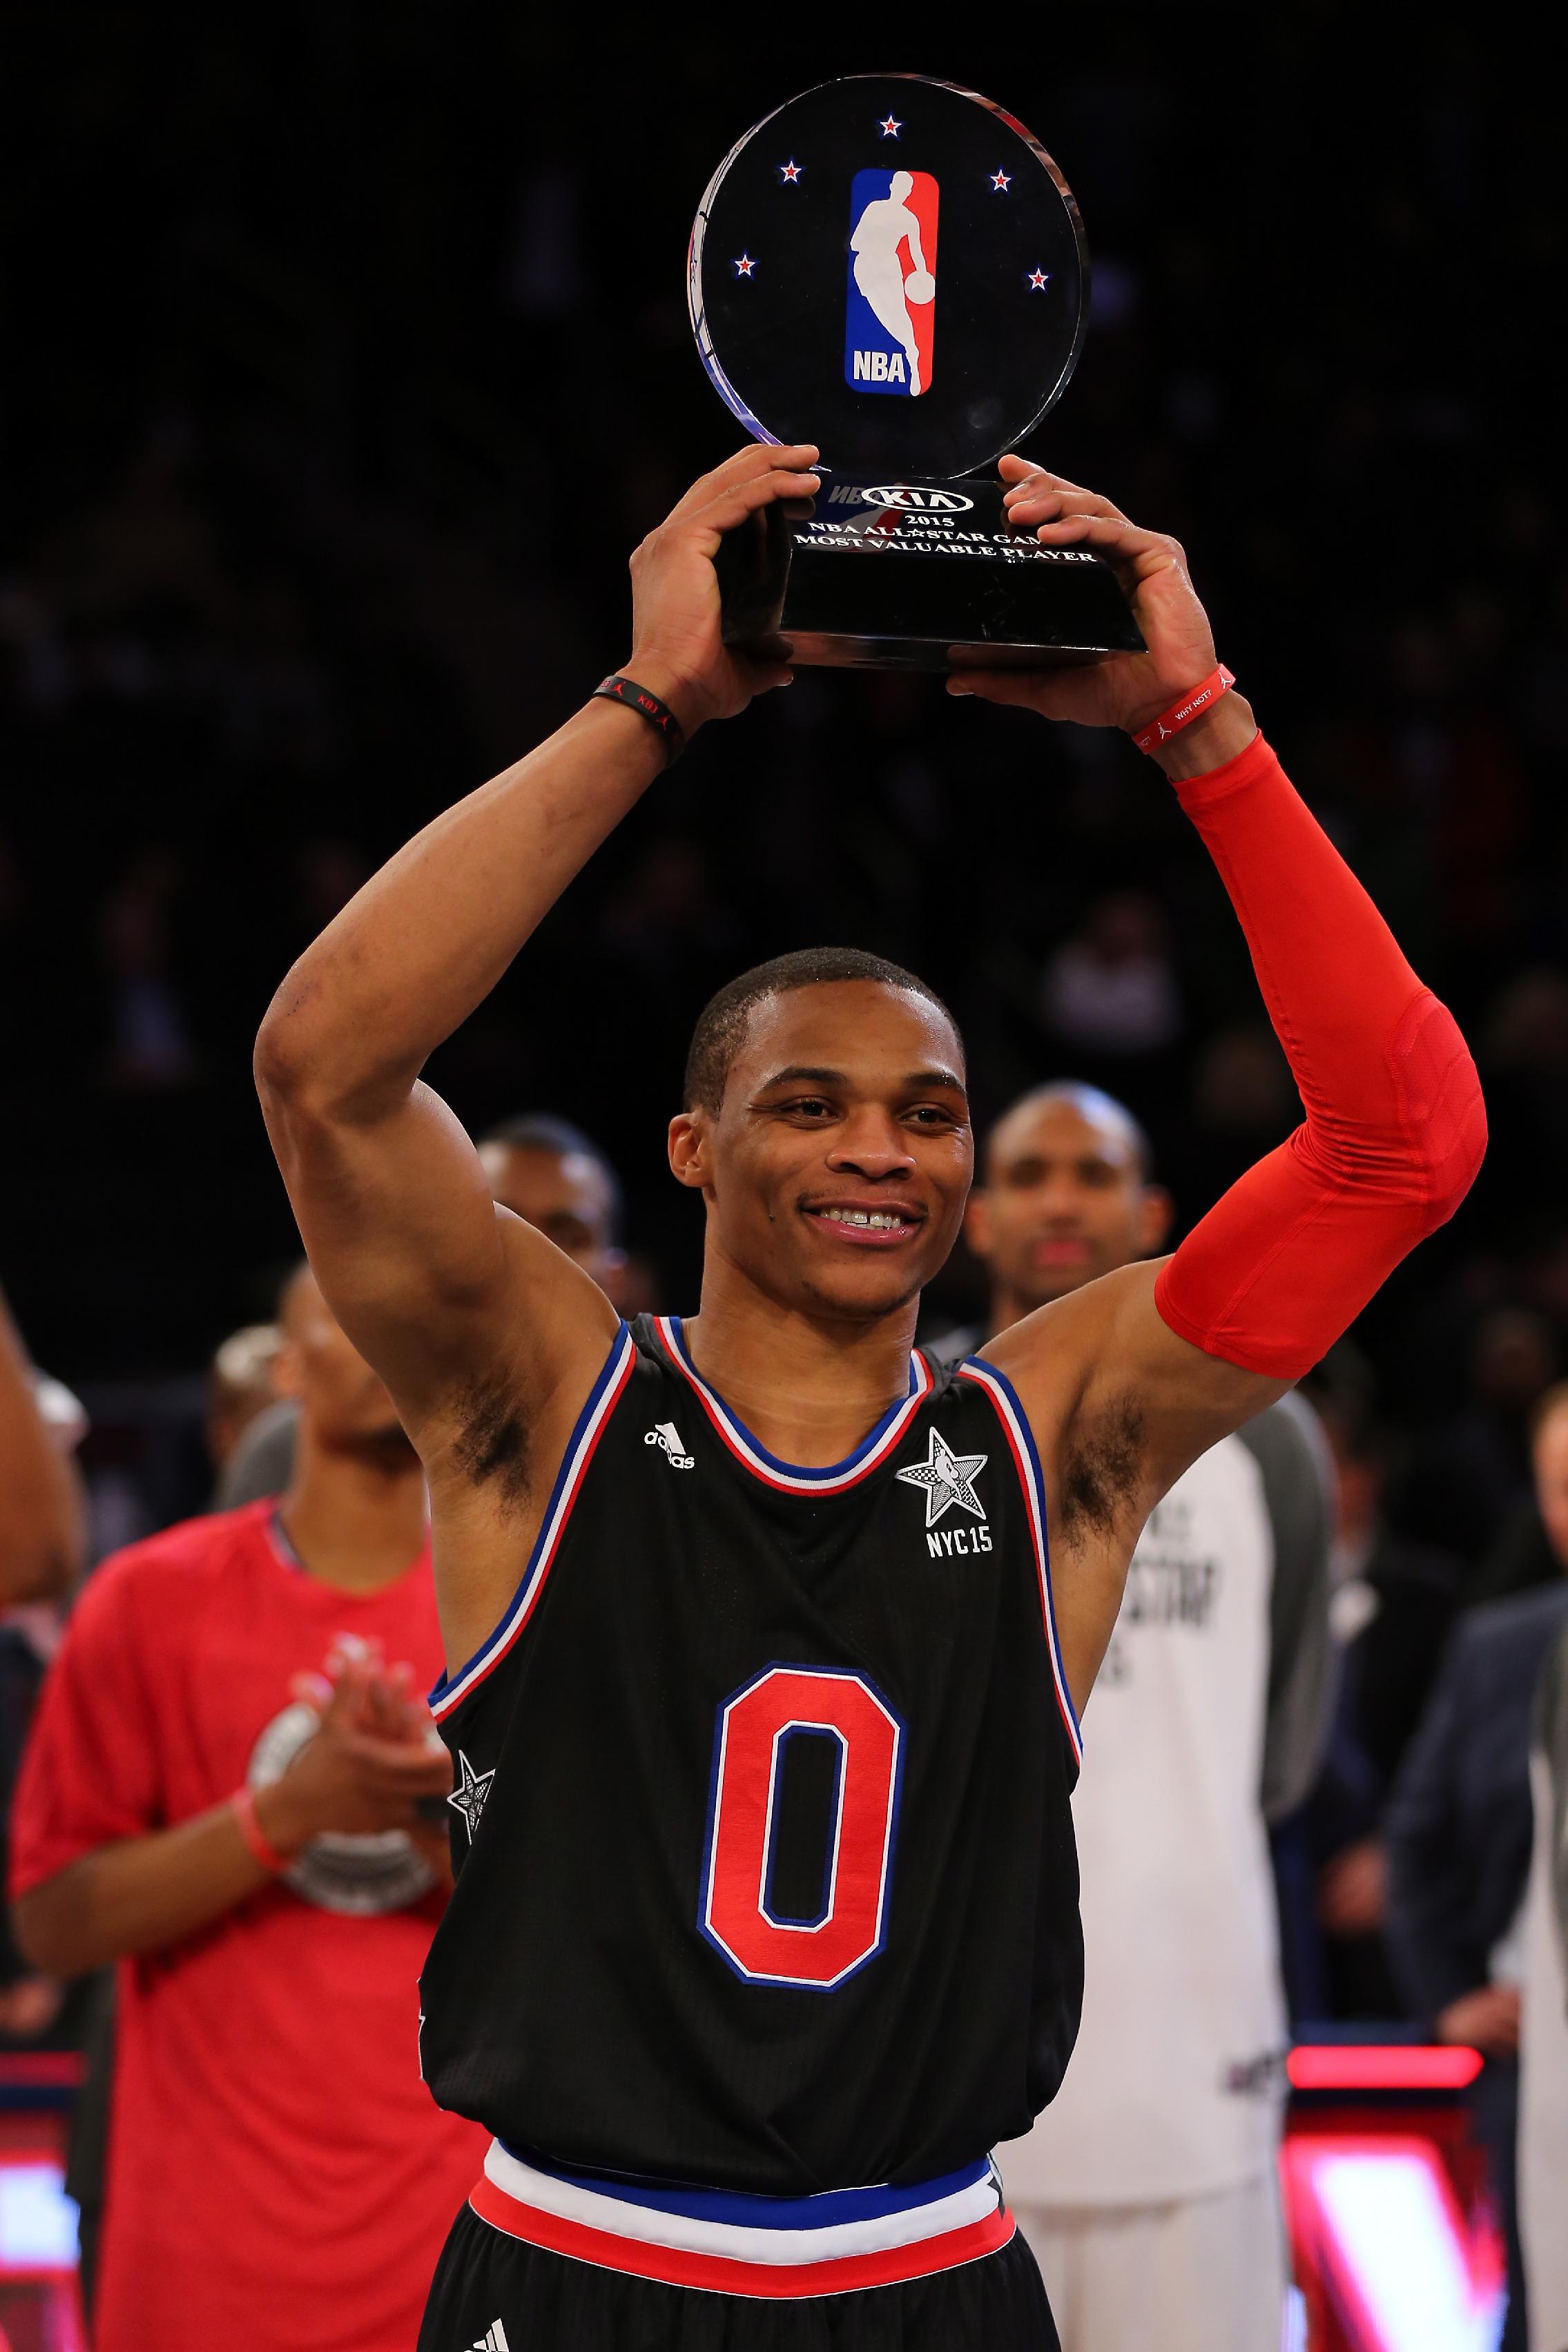 Russell Westbrook celebrates after winning the MVP Trophy in the 2015 NBA All-Star Game. (Elsa/Getty Images)